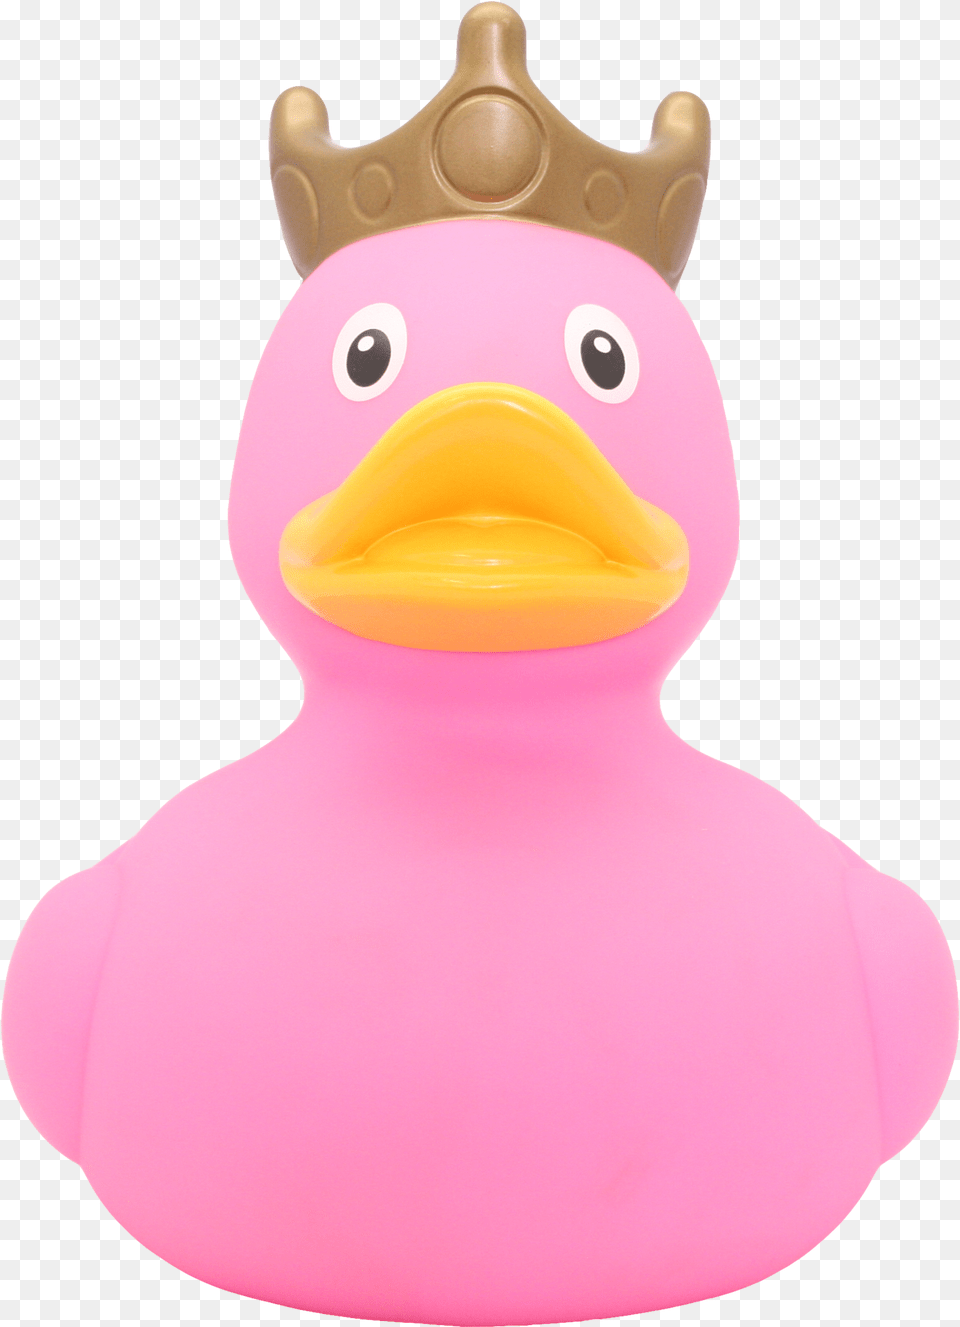 Big Rubber Duck With Crown, Figurine Png